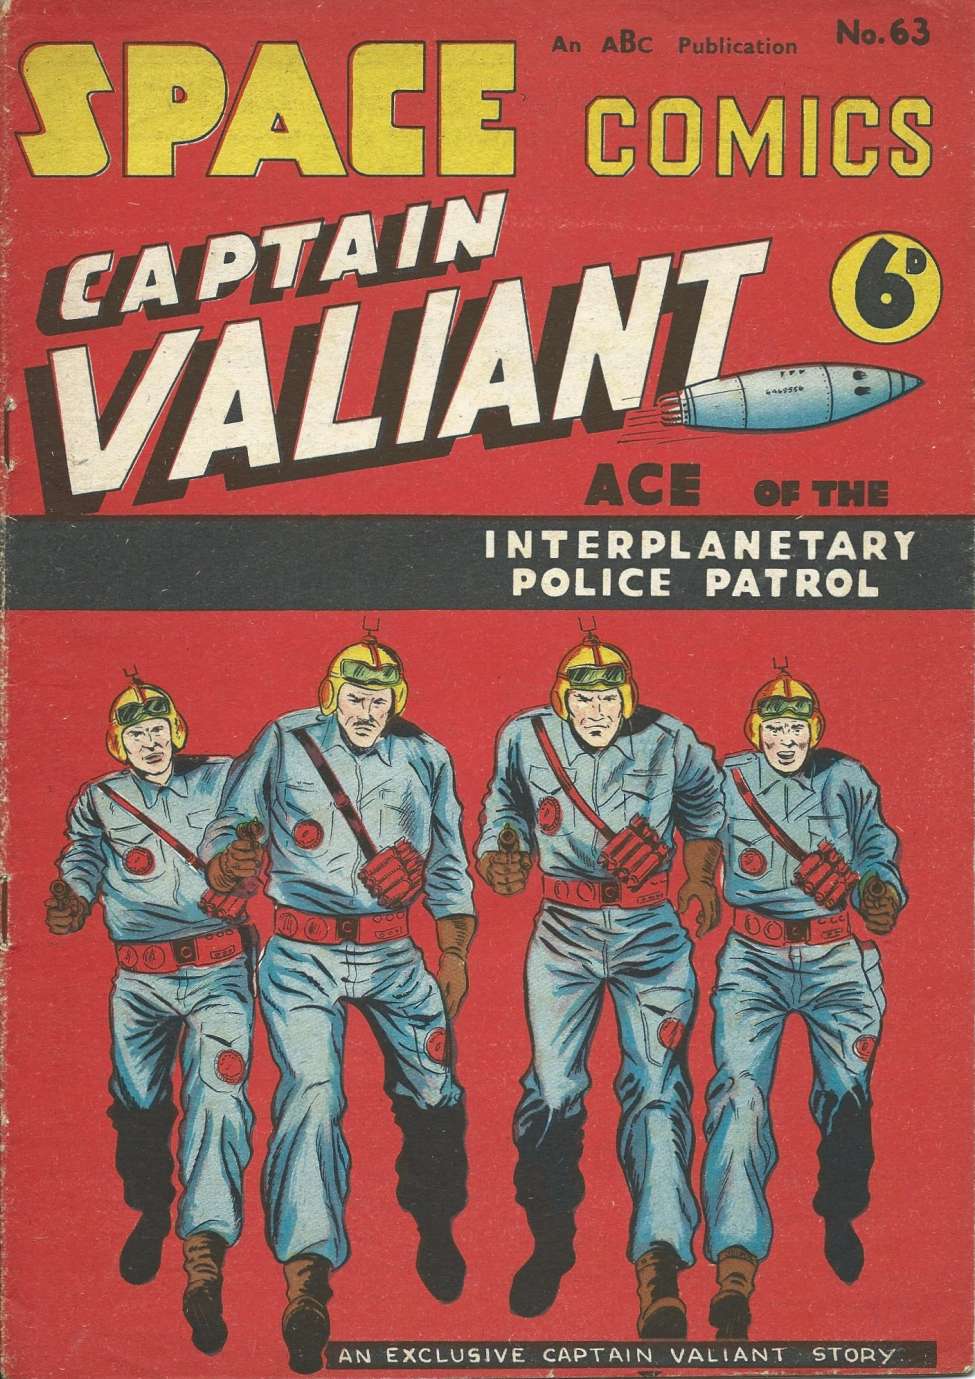 Comic Book Cover For Space Comics (Captain Valiant) 63